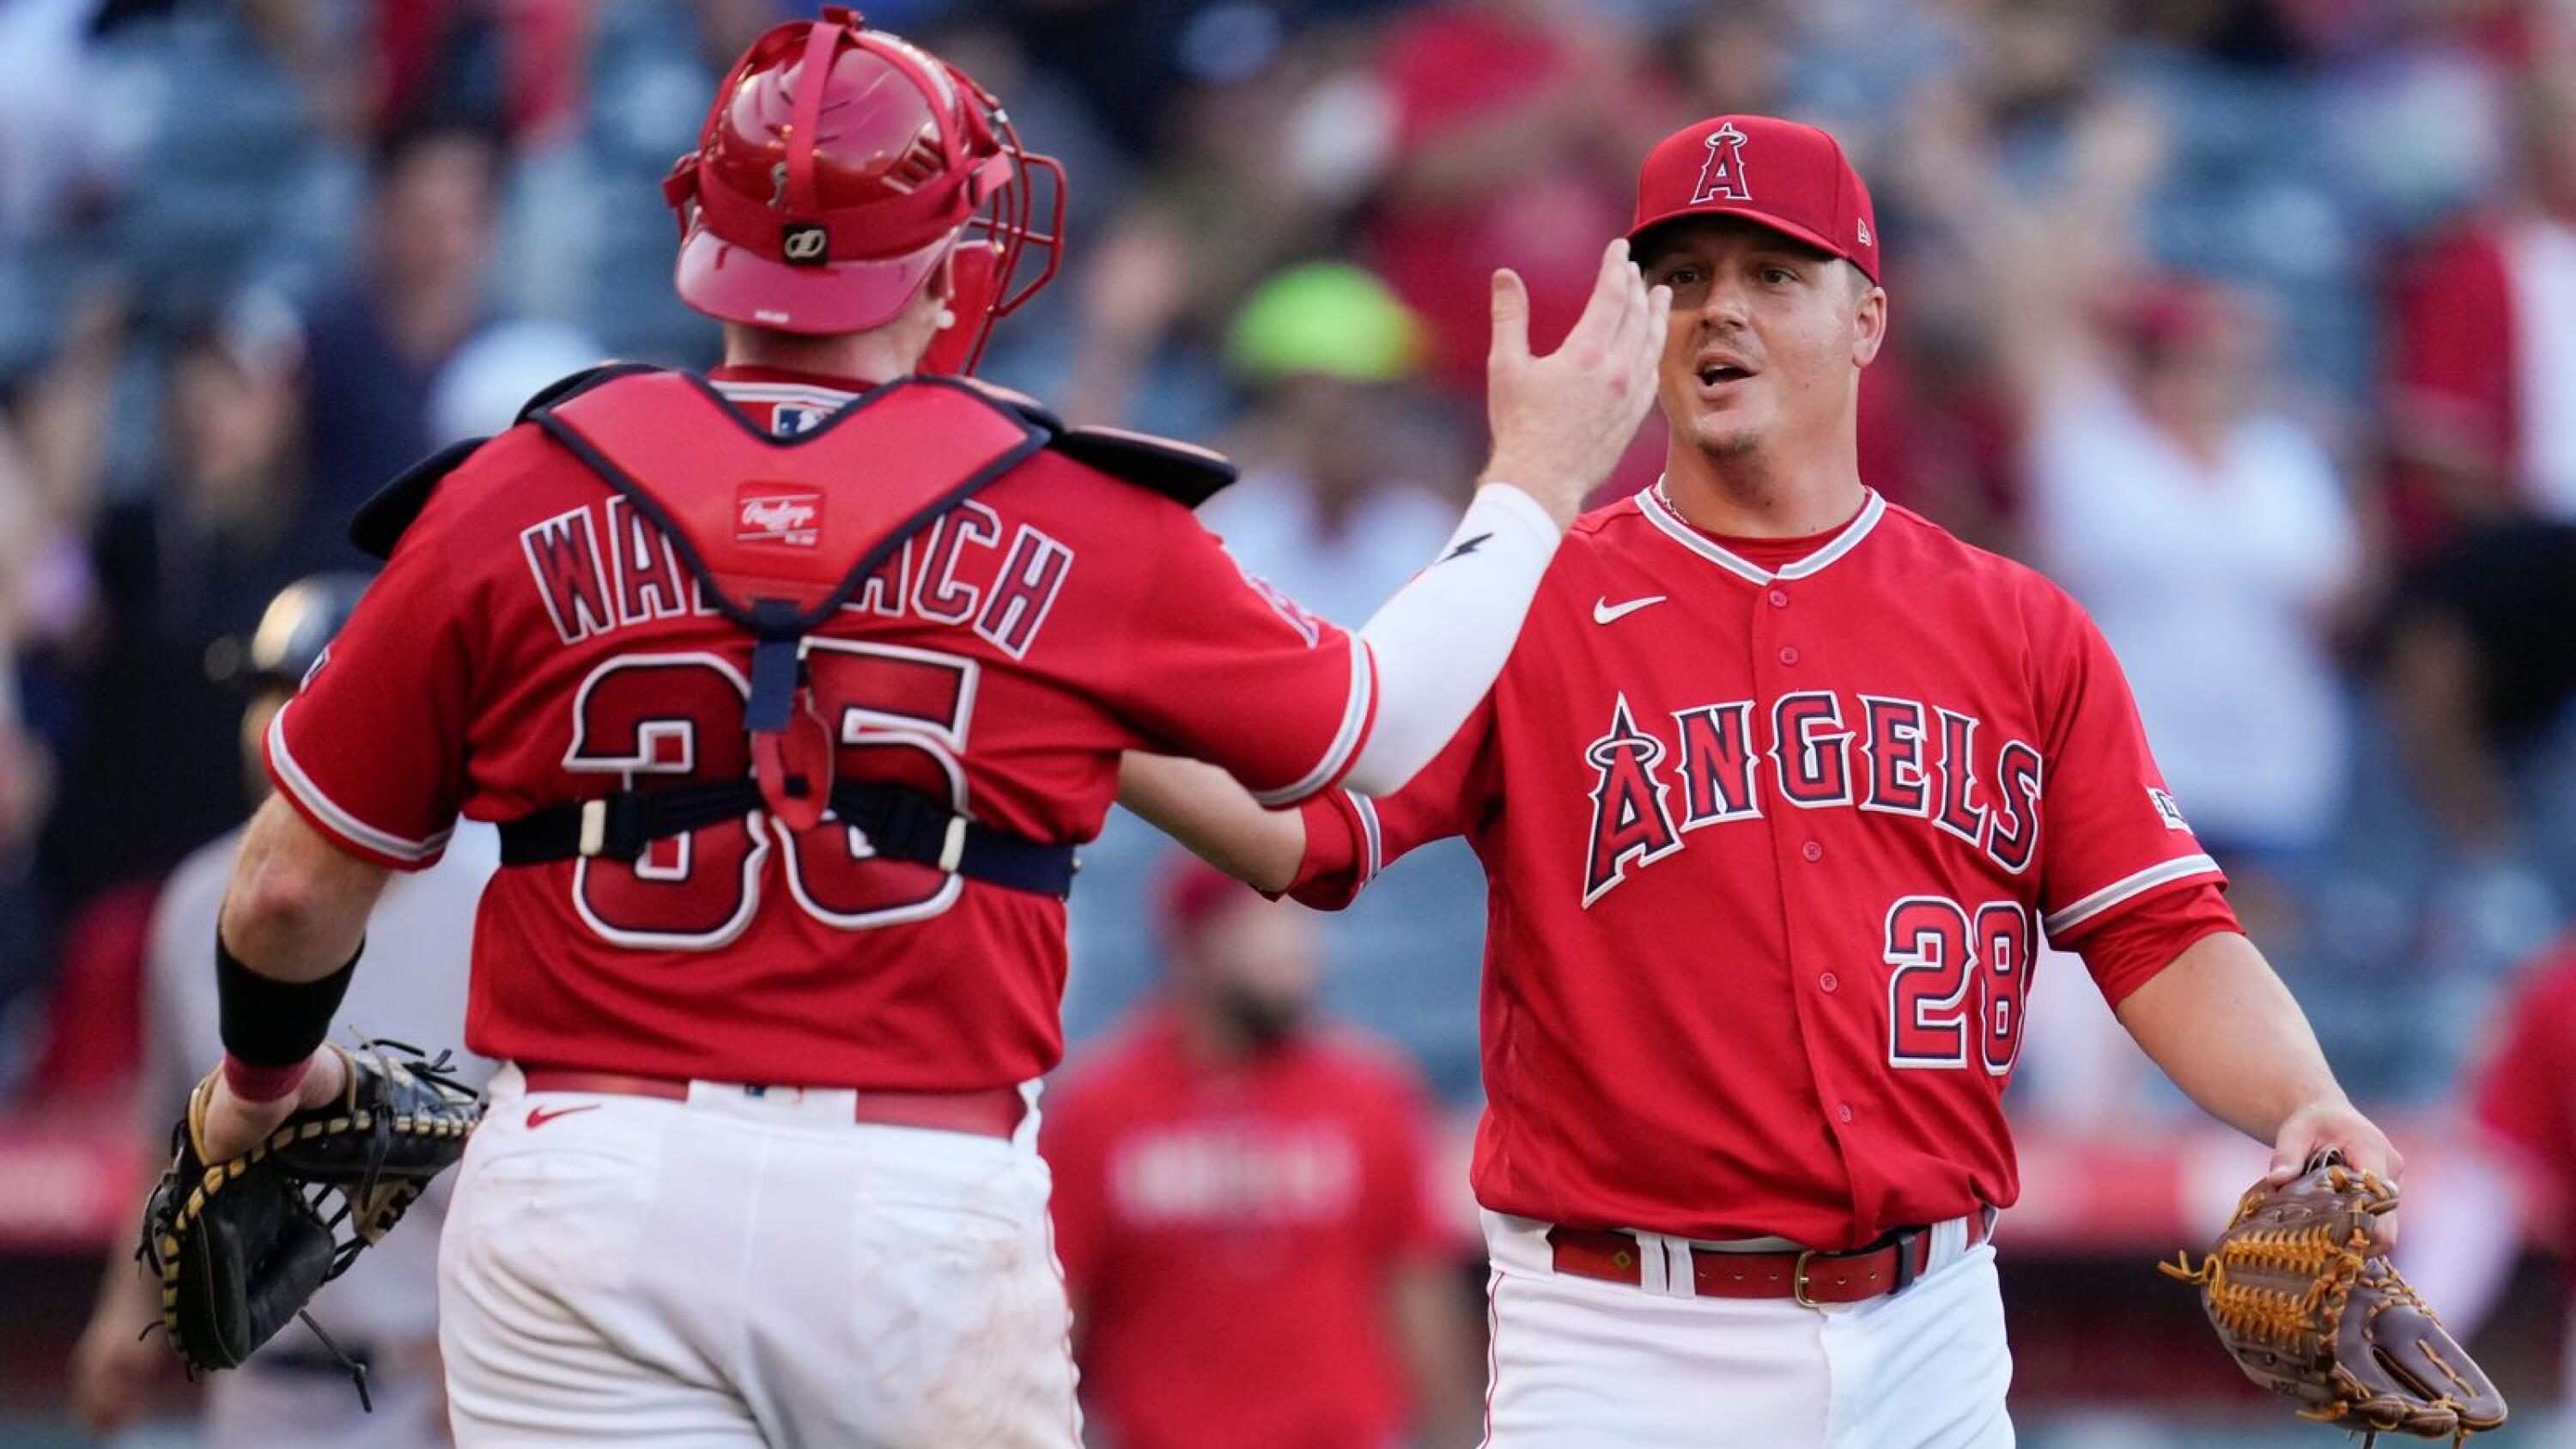 Angels finish sweep of Yankees with 7-3 win, finishing New York's